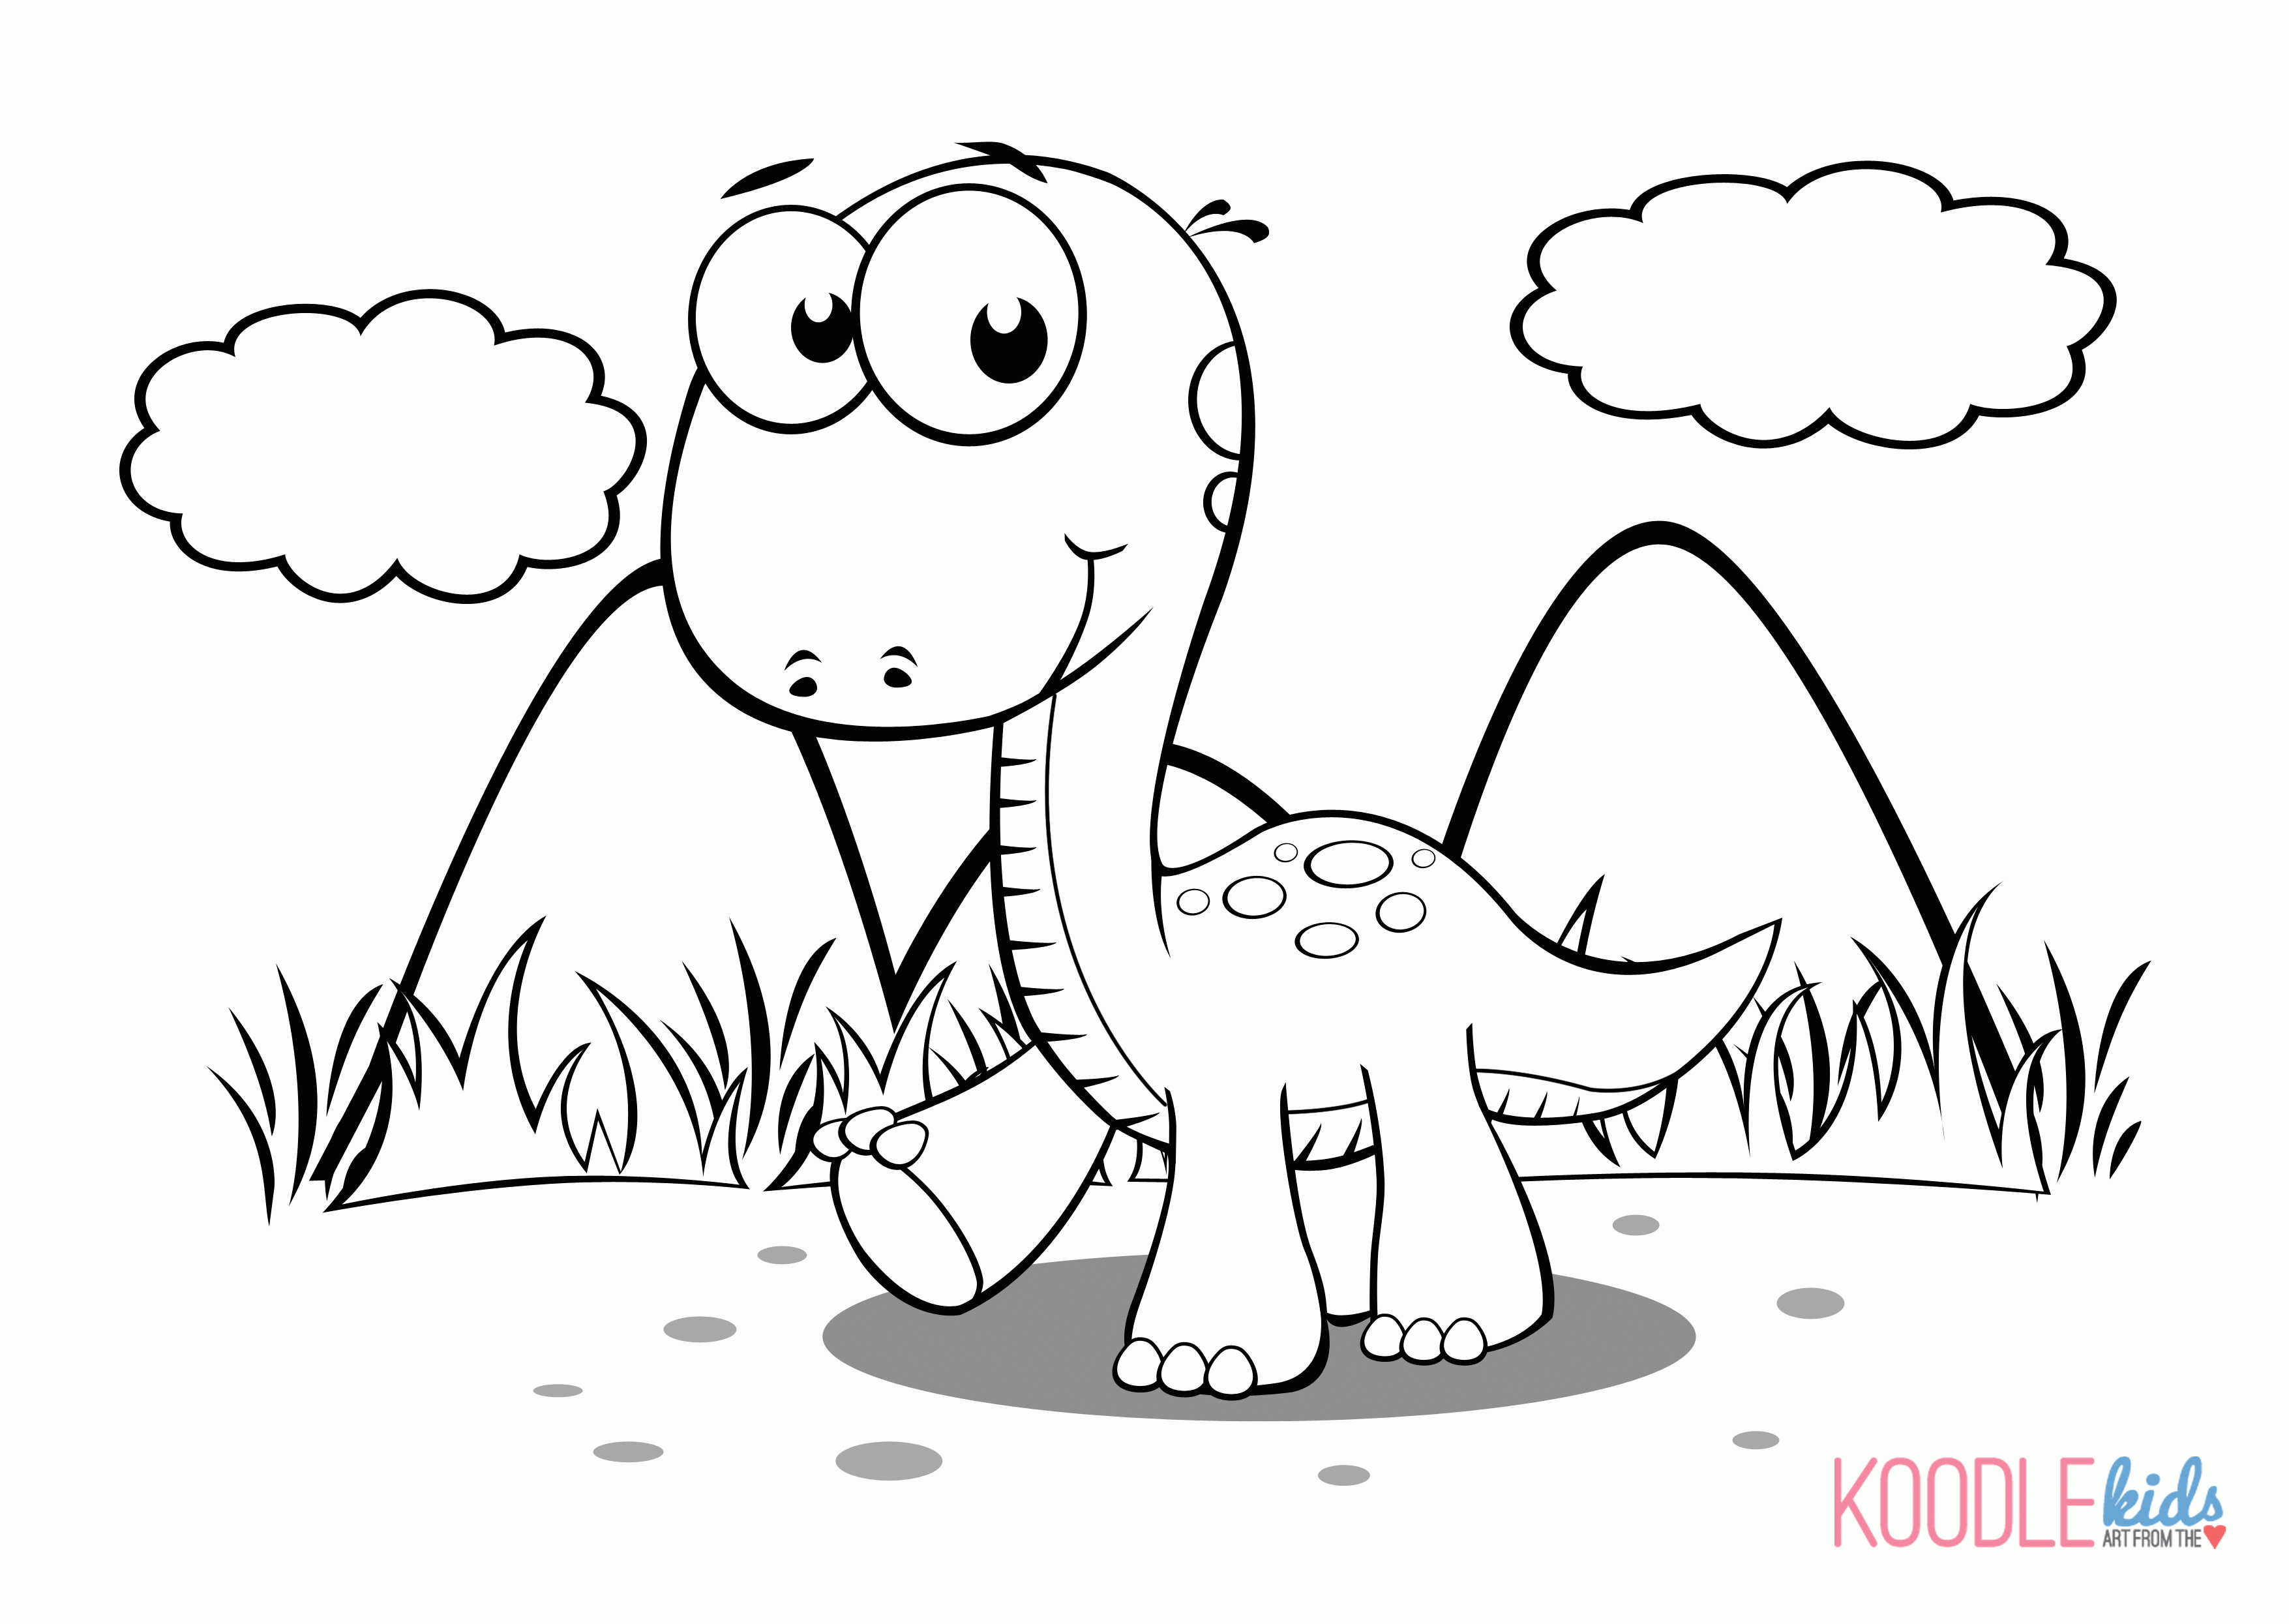 Easy Cute Baby Dinosaurs Coloring Pages #6452 Cute Baby Dinosaurs